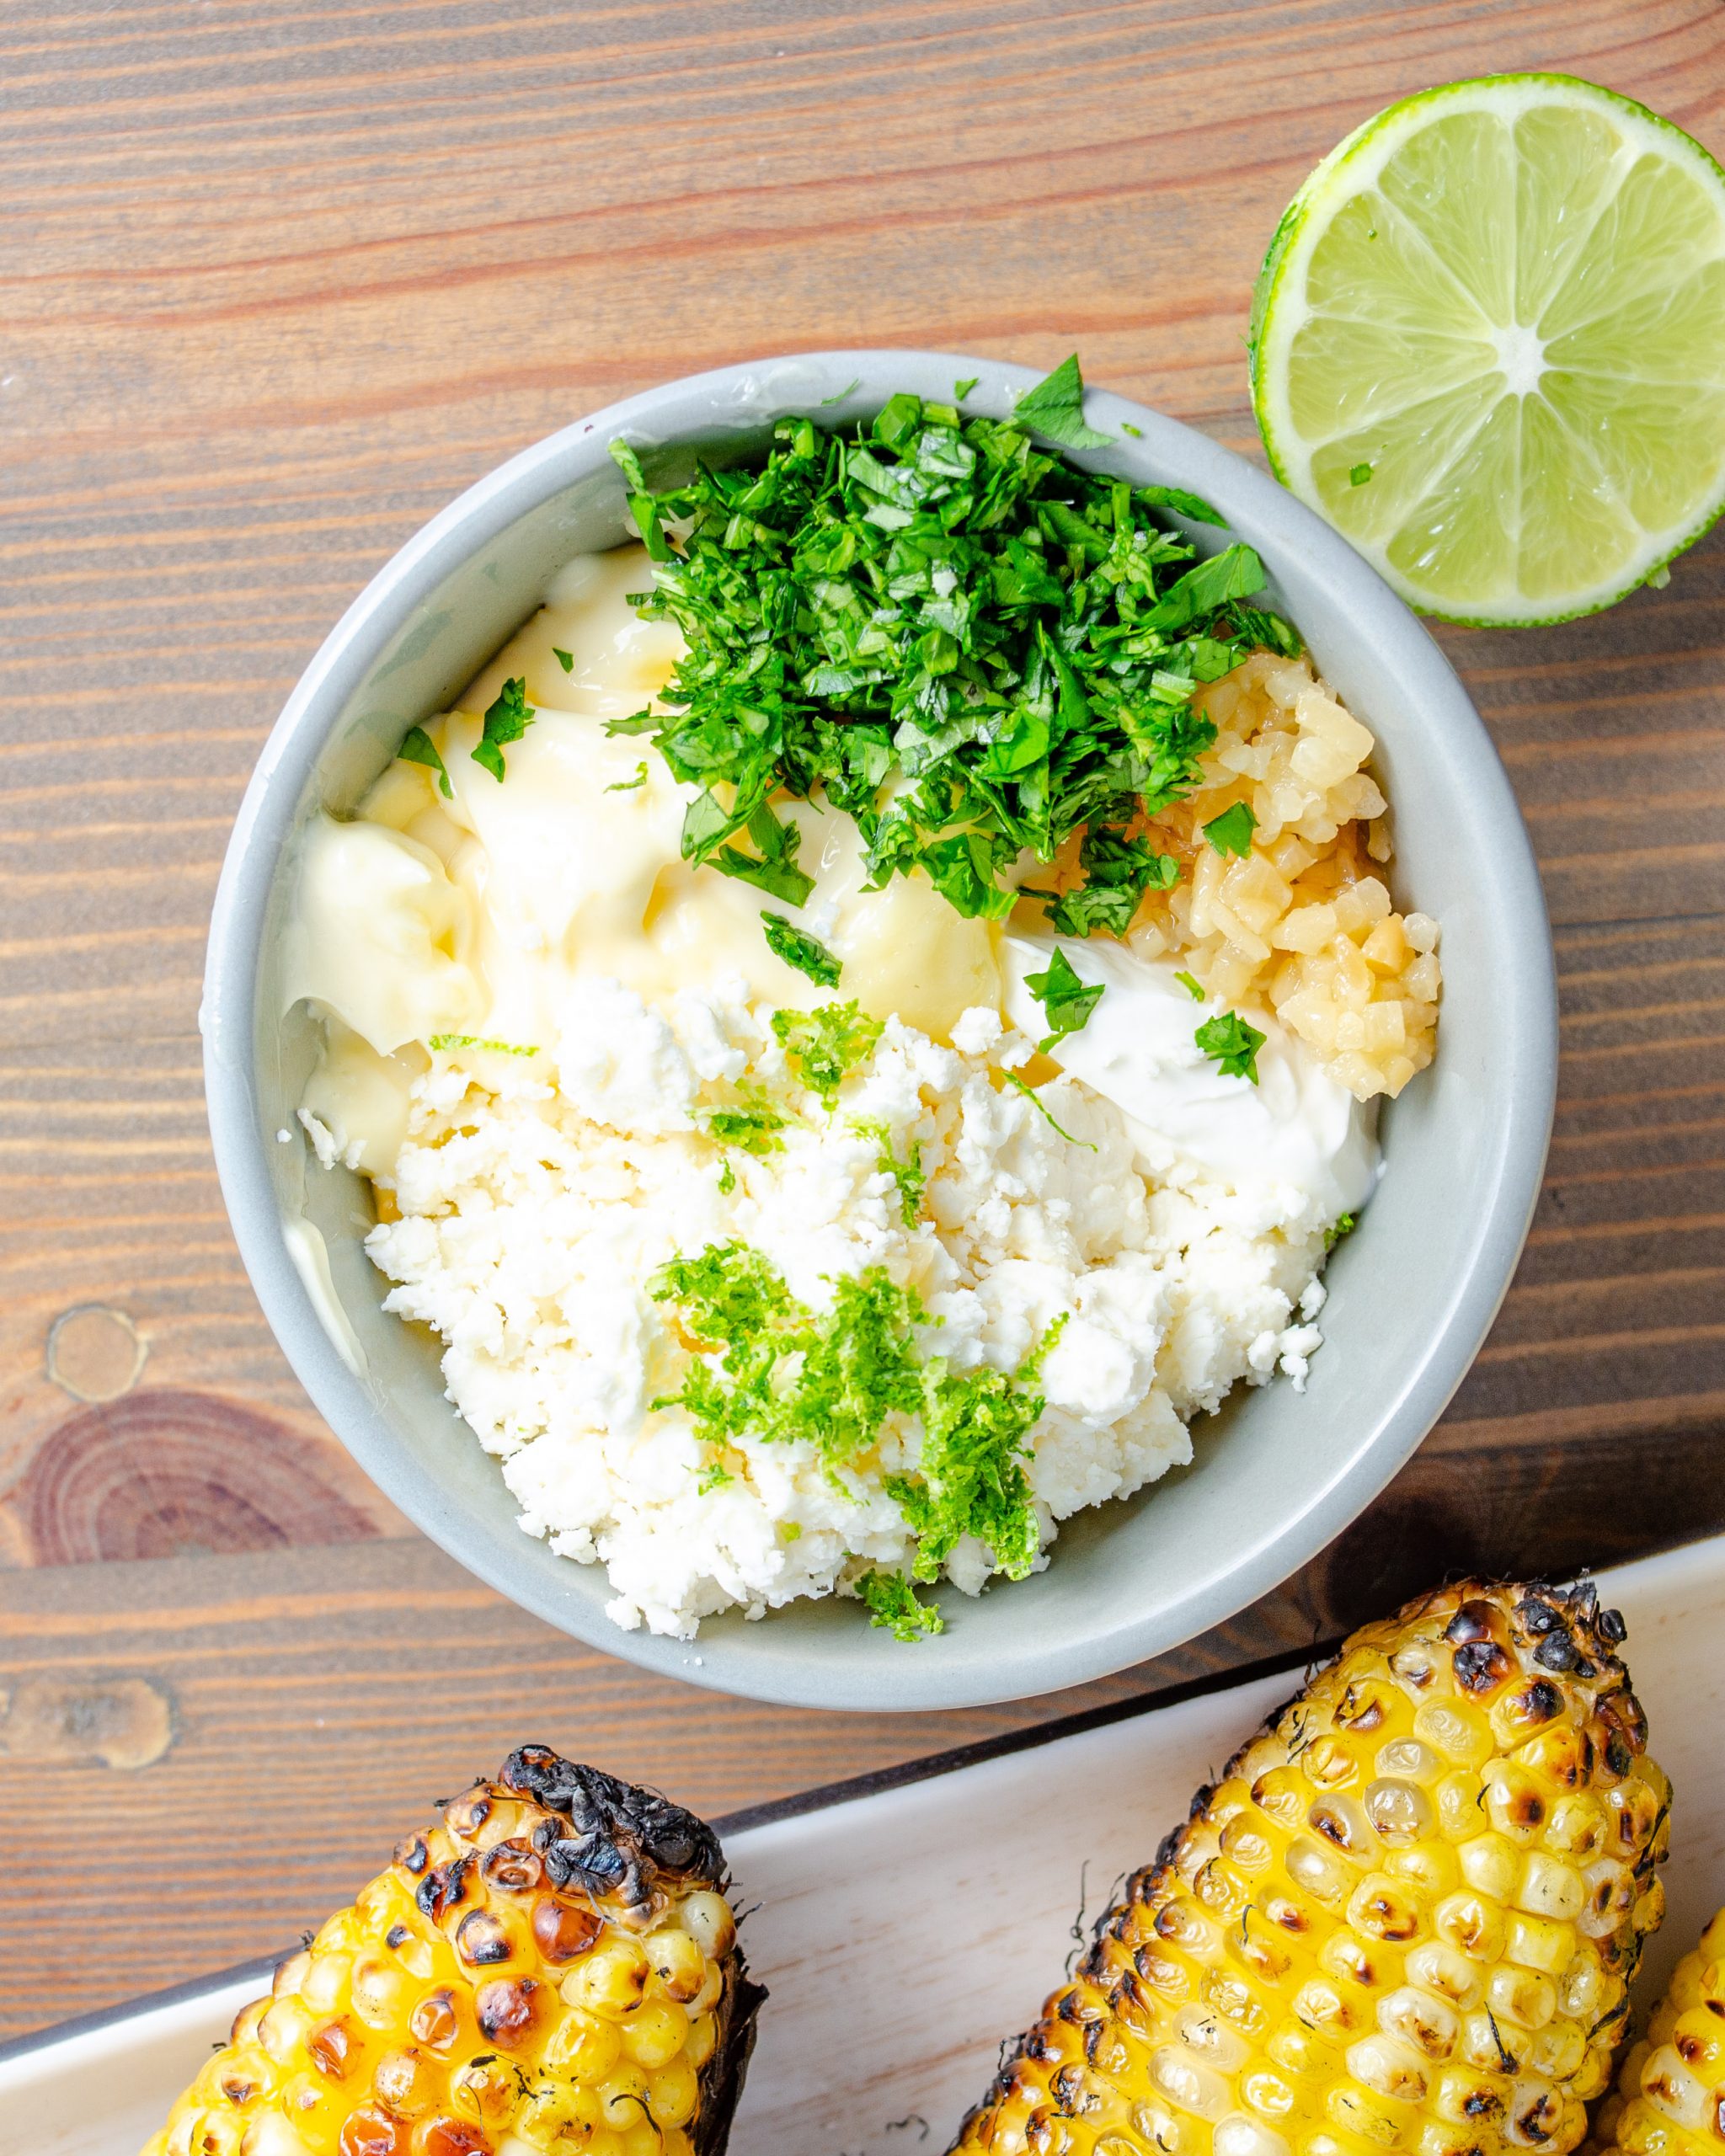 In a small bowl, mix together sour cream, mayonnaise, cotija cheese, garlic, lime zest and juice, and cilantro.